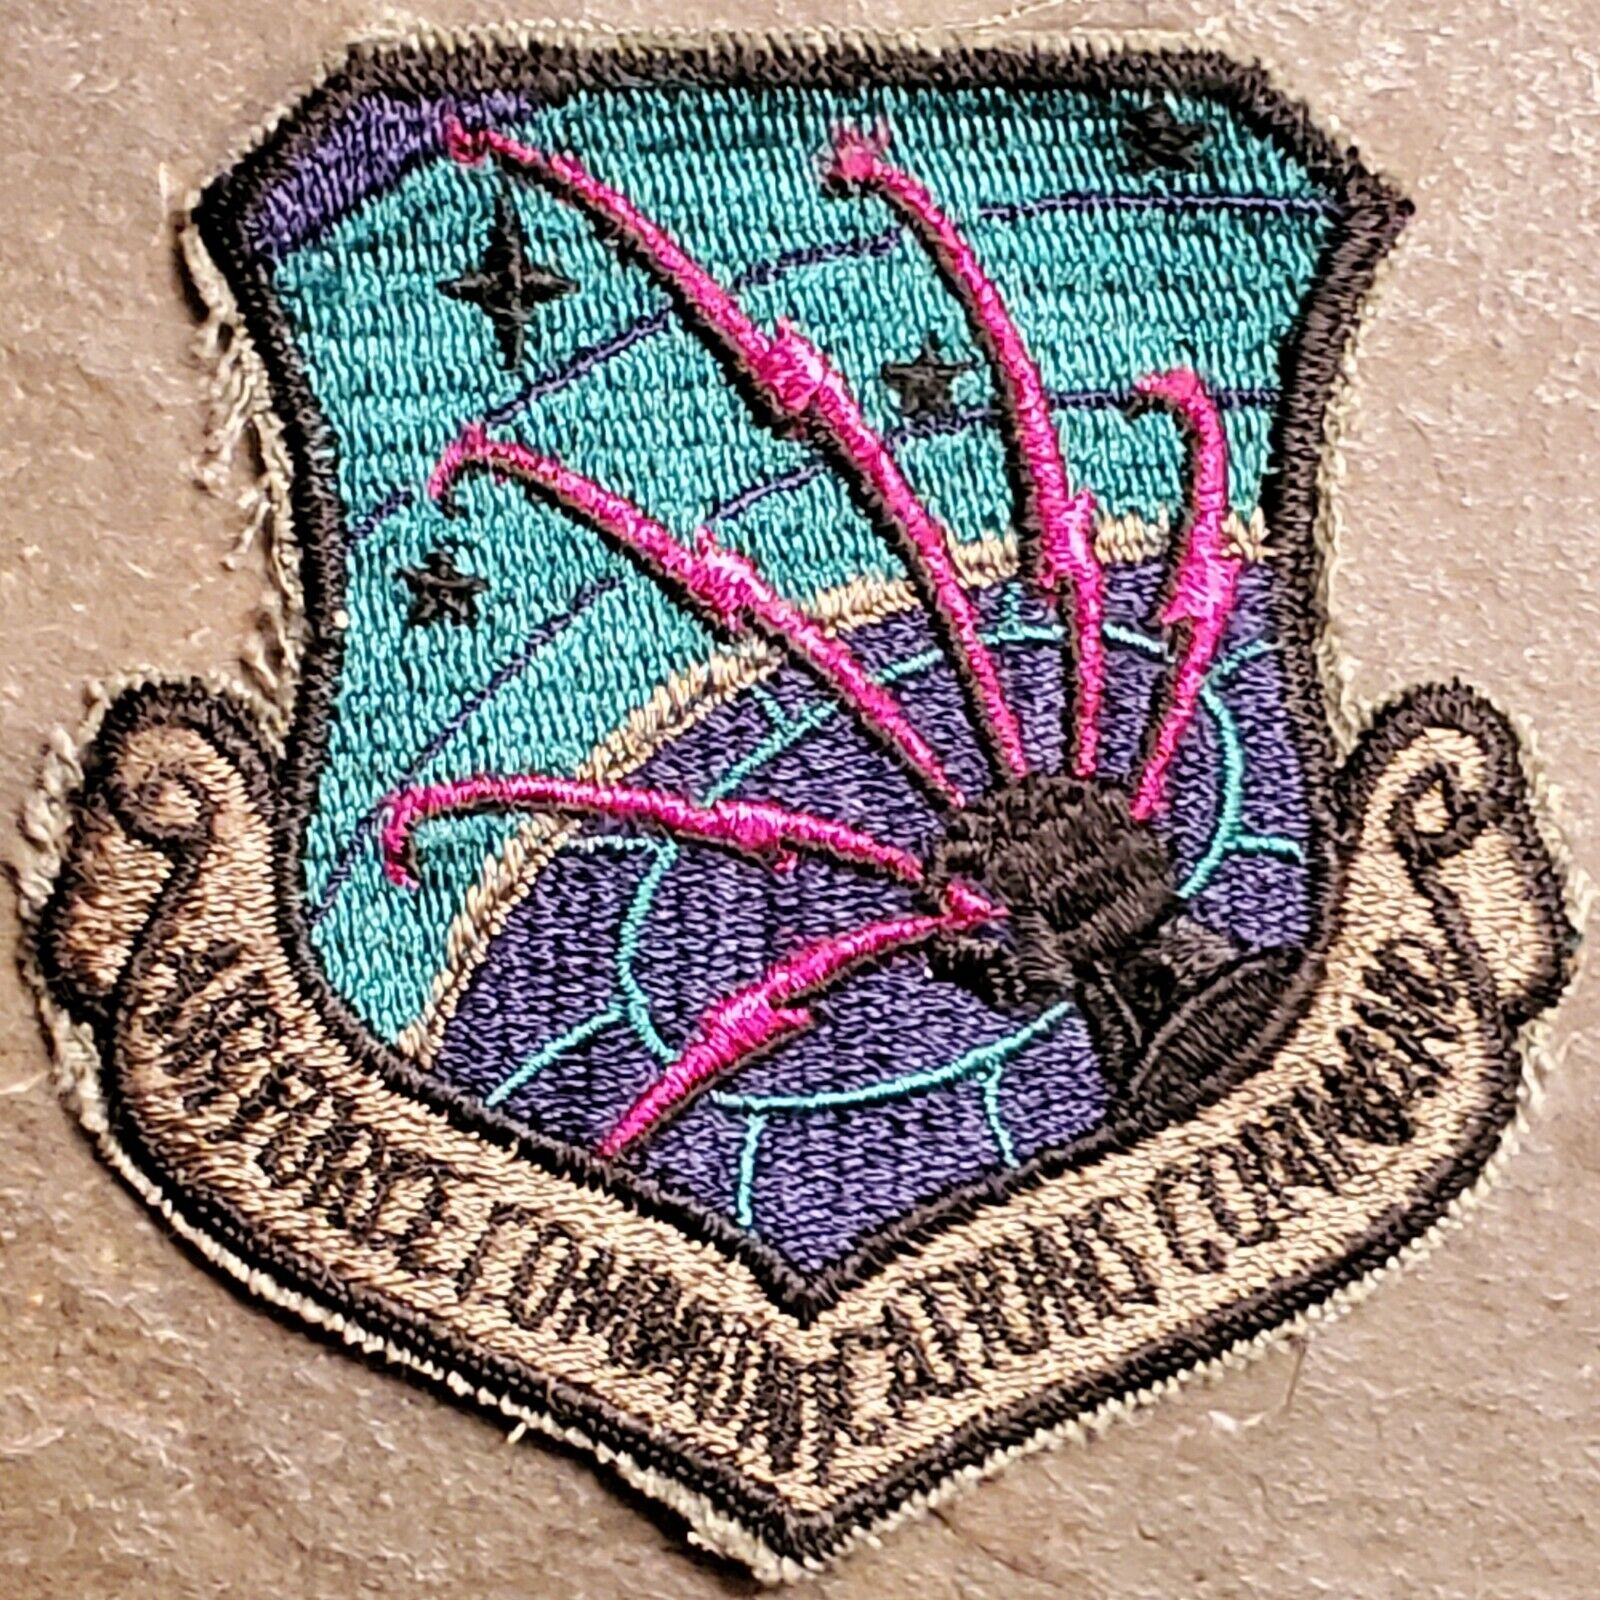 USAF COMMUNICATIONS COMMAND PATCH - SUBDUED: SCOTT AFB, IL: MILITARY VINTAGE